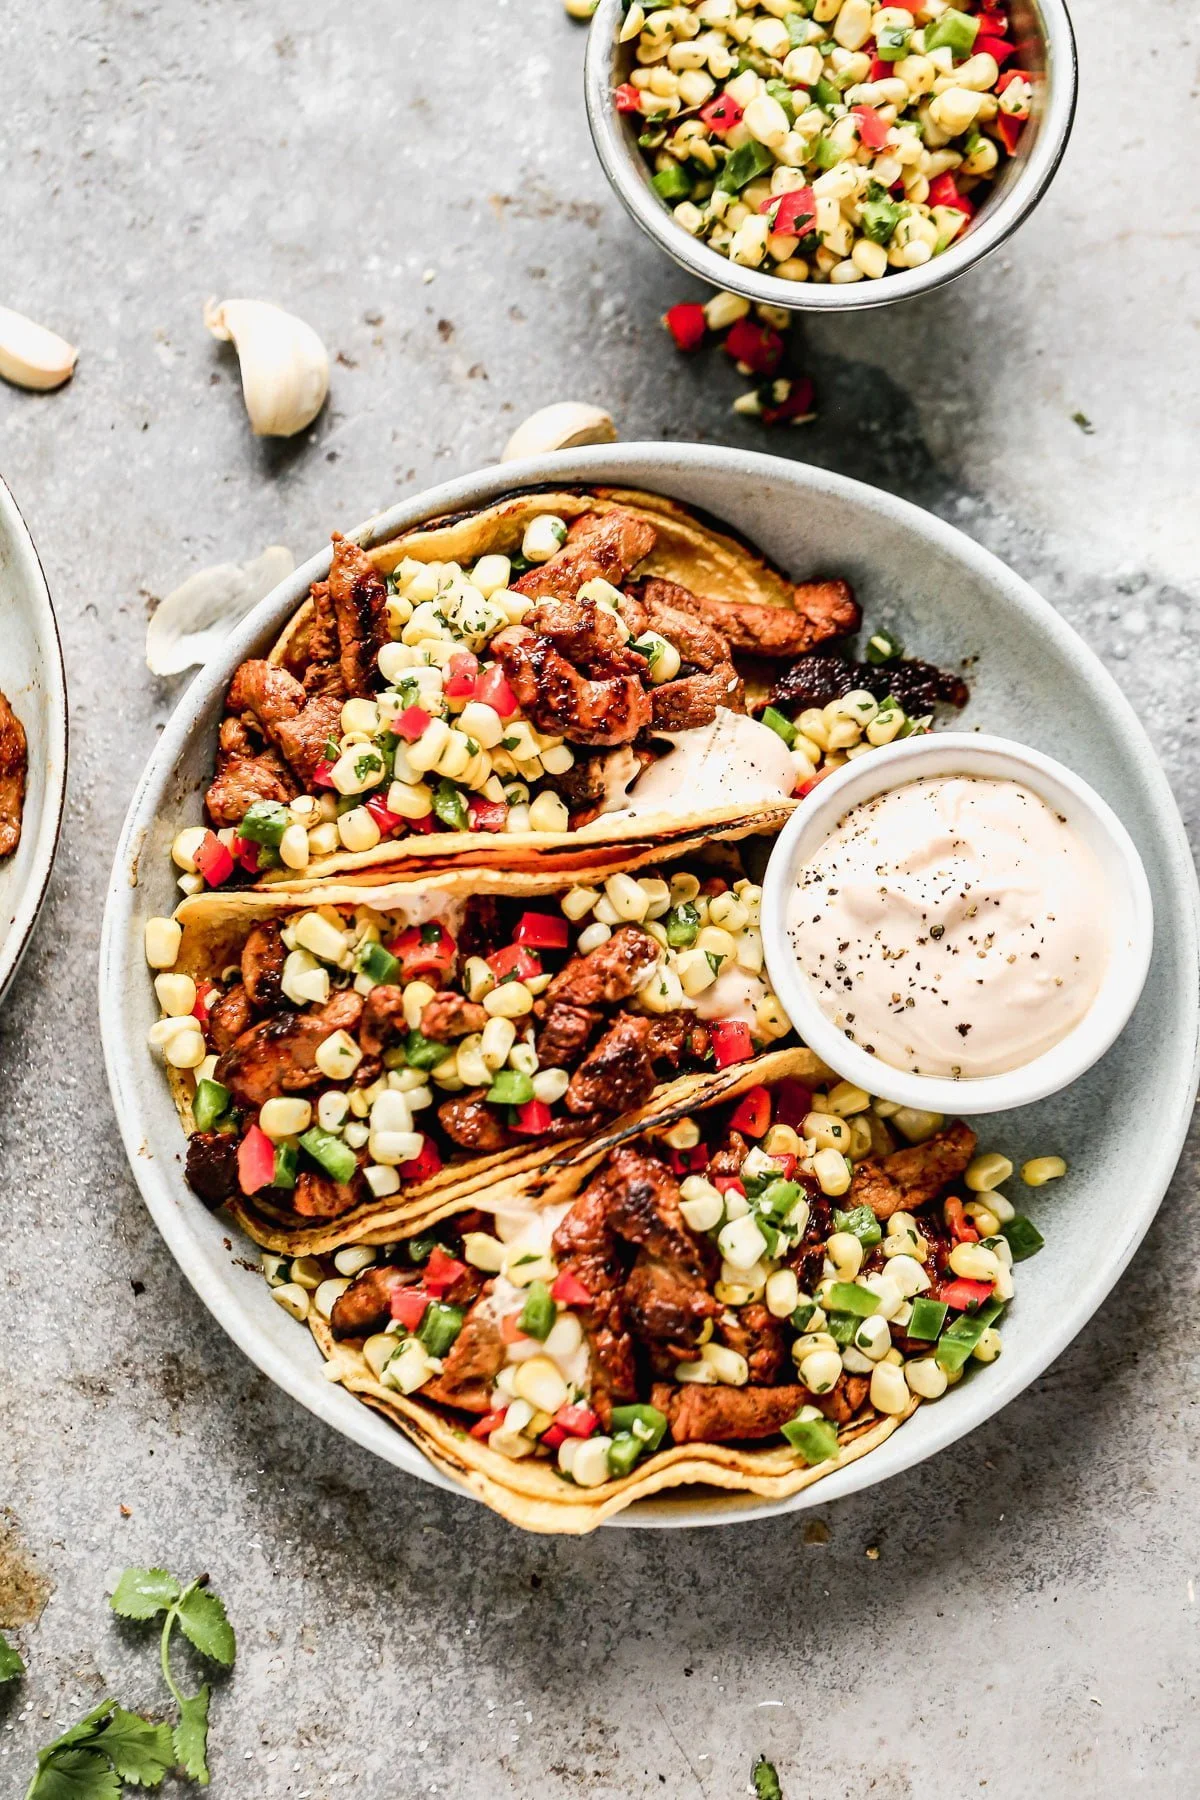 Pork Tenderloin Tacos. We flavor lean pork tenderloin in an easy soy sauce and lime marinade, crisp it up in a cast-iron skillet and then nestle it into charred corn tortillas with an easy corn salsa and zippy lime crema. Healthy, easy and so satisfying. 